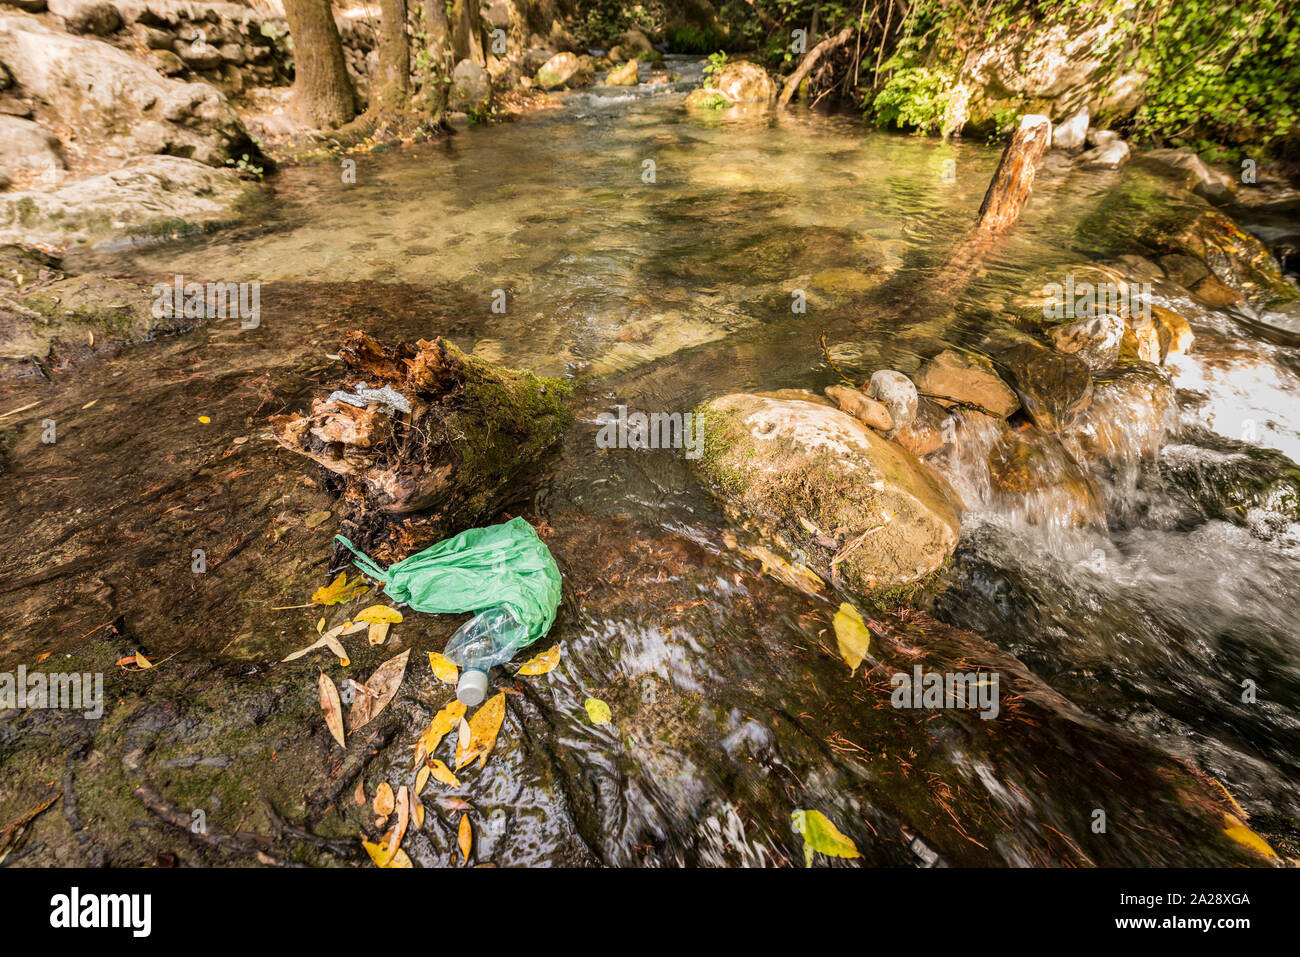 Garbage in an abandoned plastic bag on the bank of a river of clean water. Concepts of environmental damage and recycling of plastic containers. Stock Photo